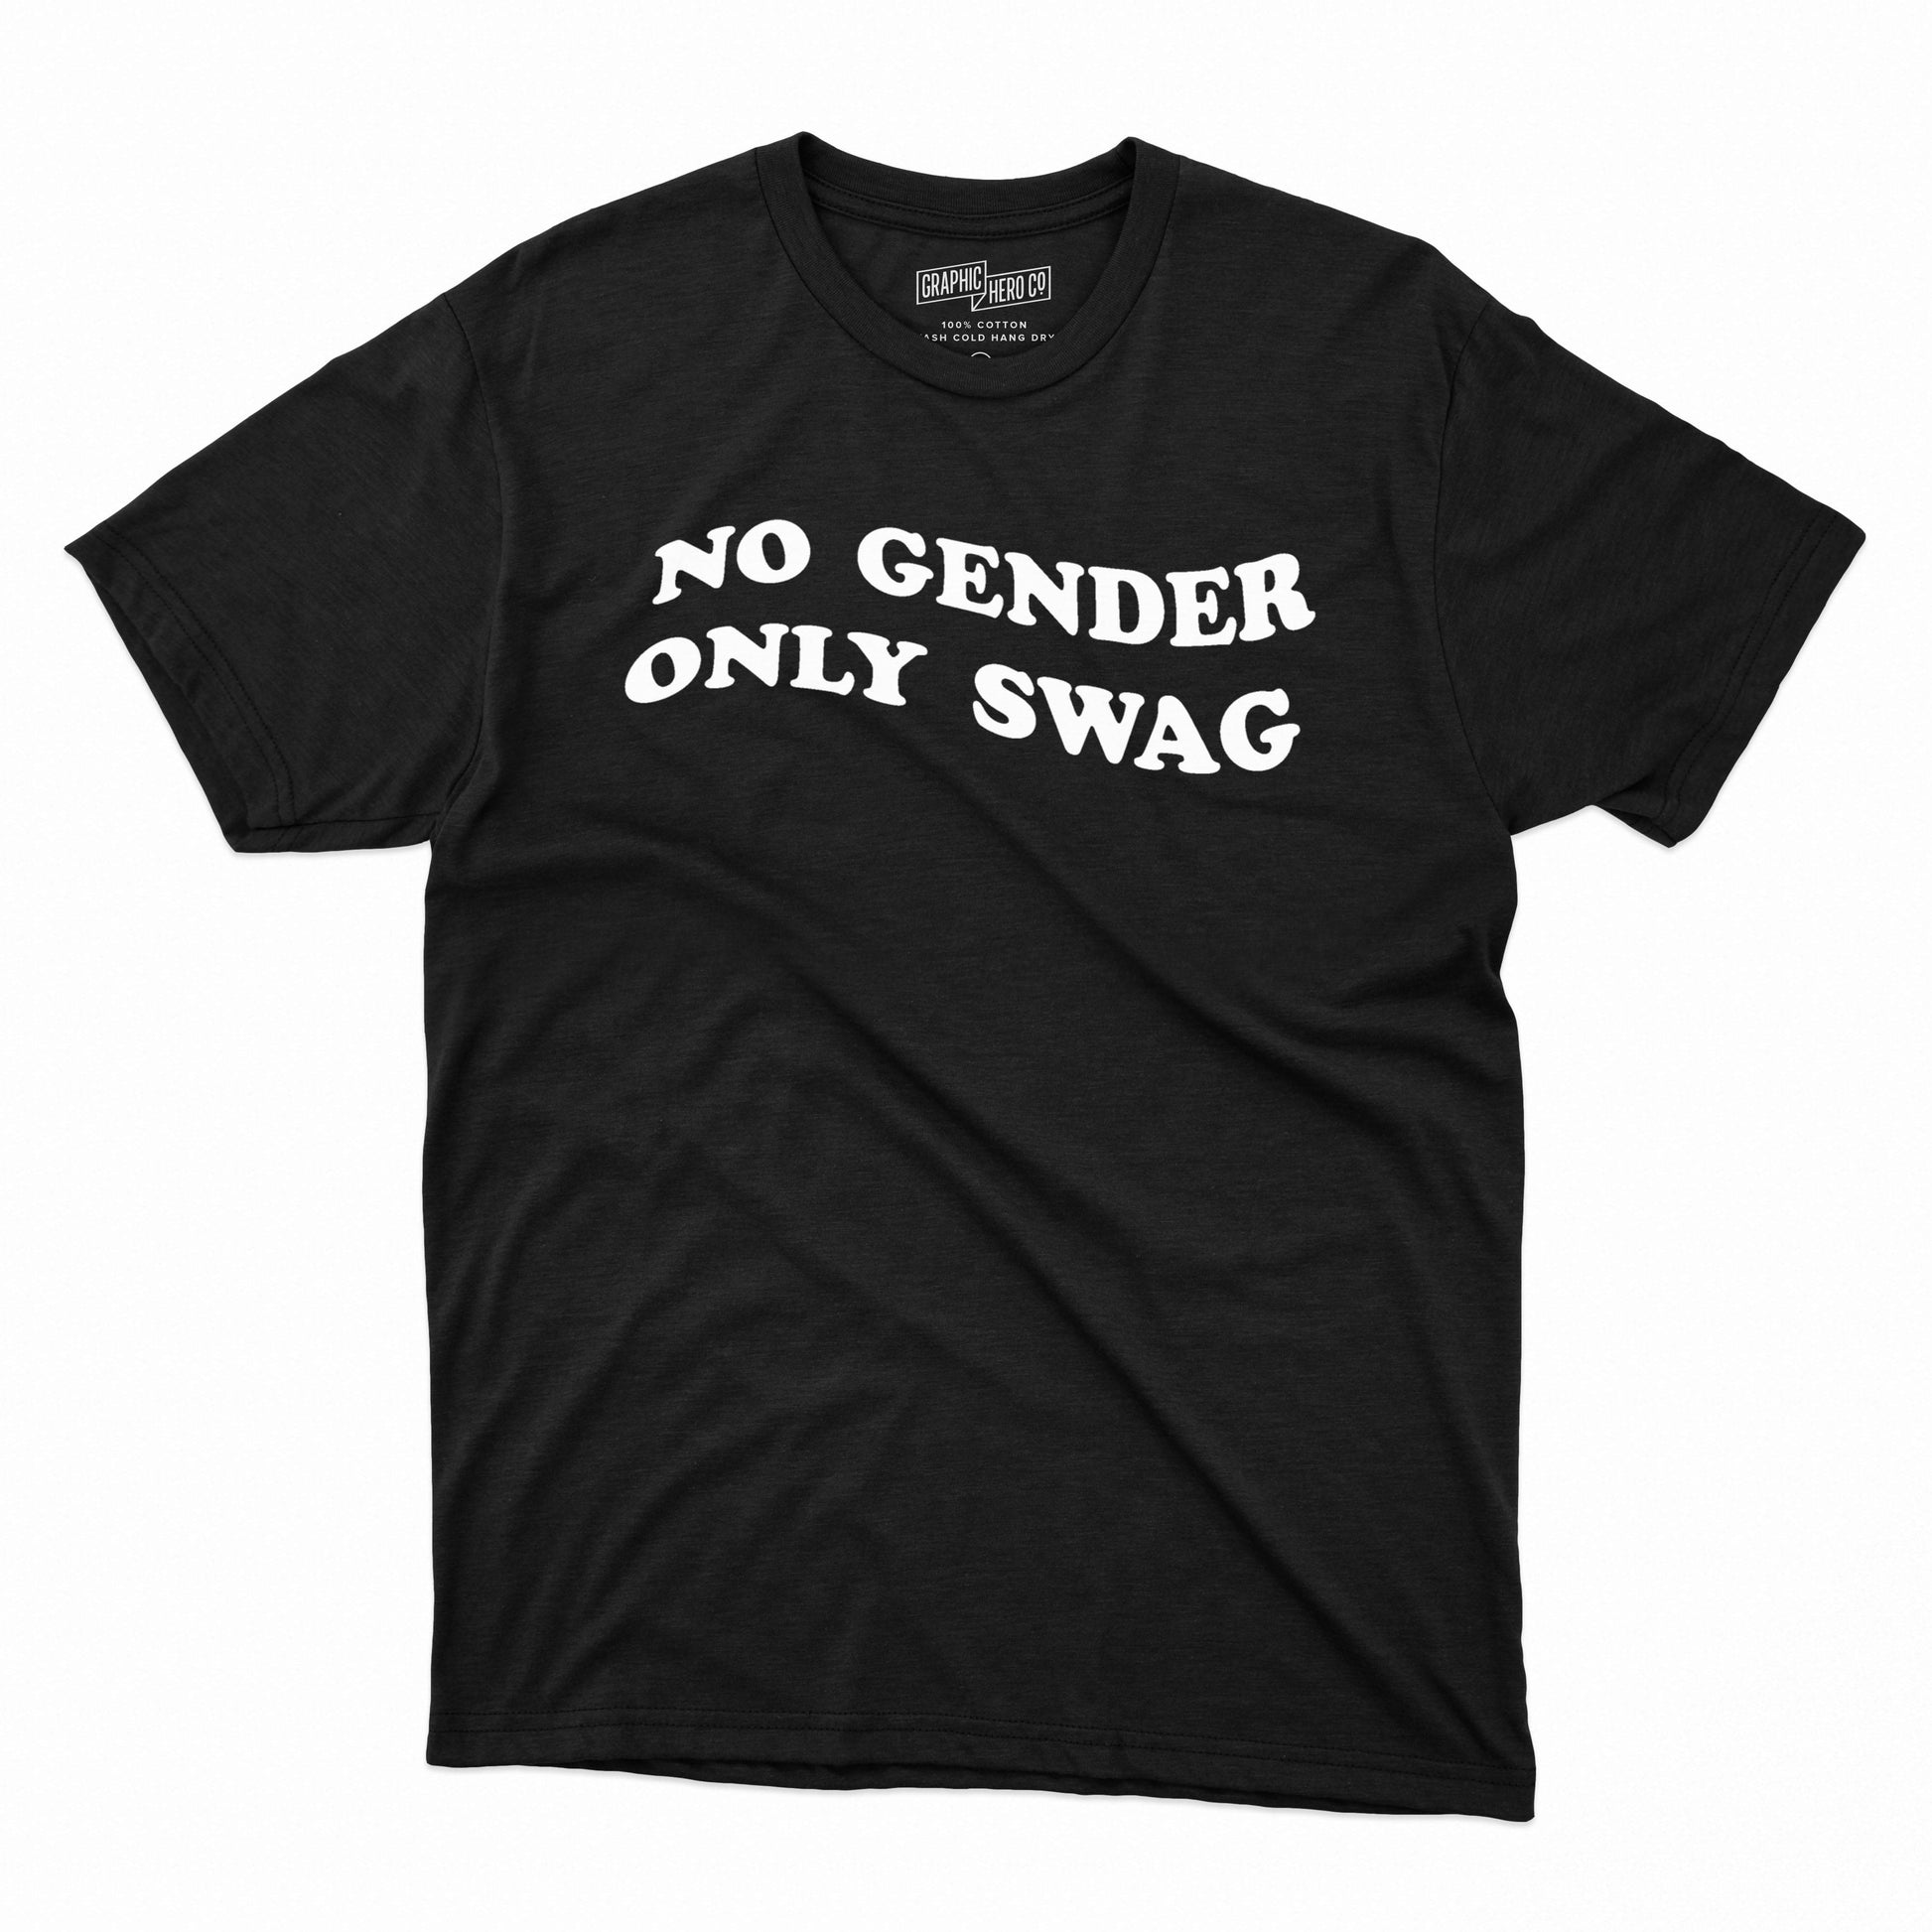 No Gender Only Swag Non-Binary Genderqueer Genderfluid Unisex T-Shirt - Rose Gold Co. Shop